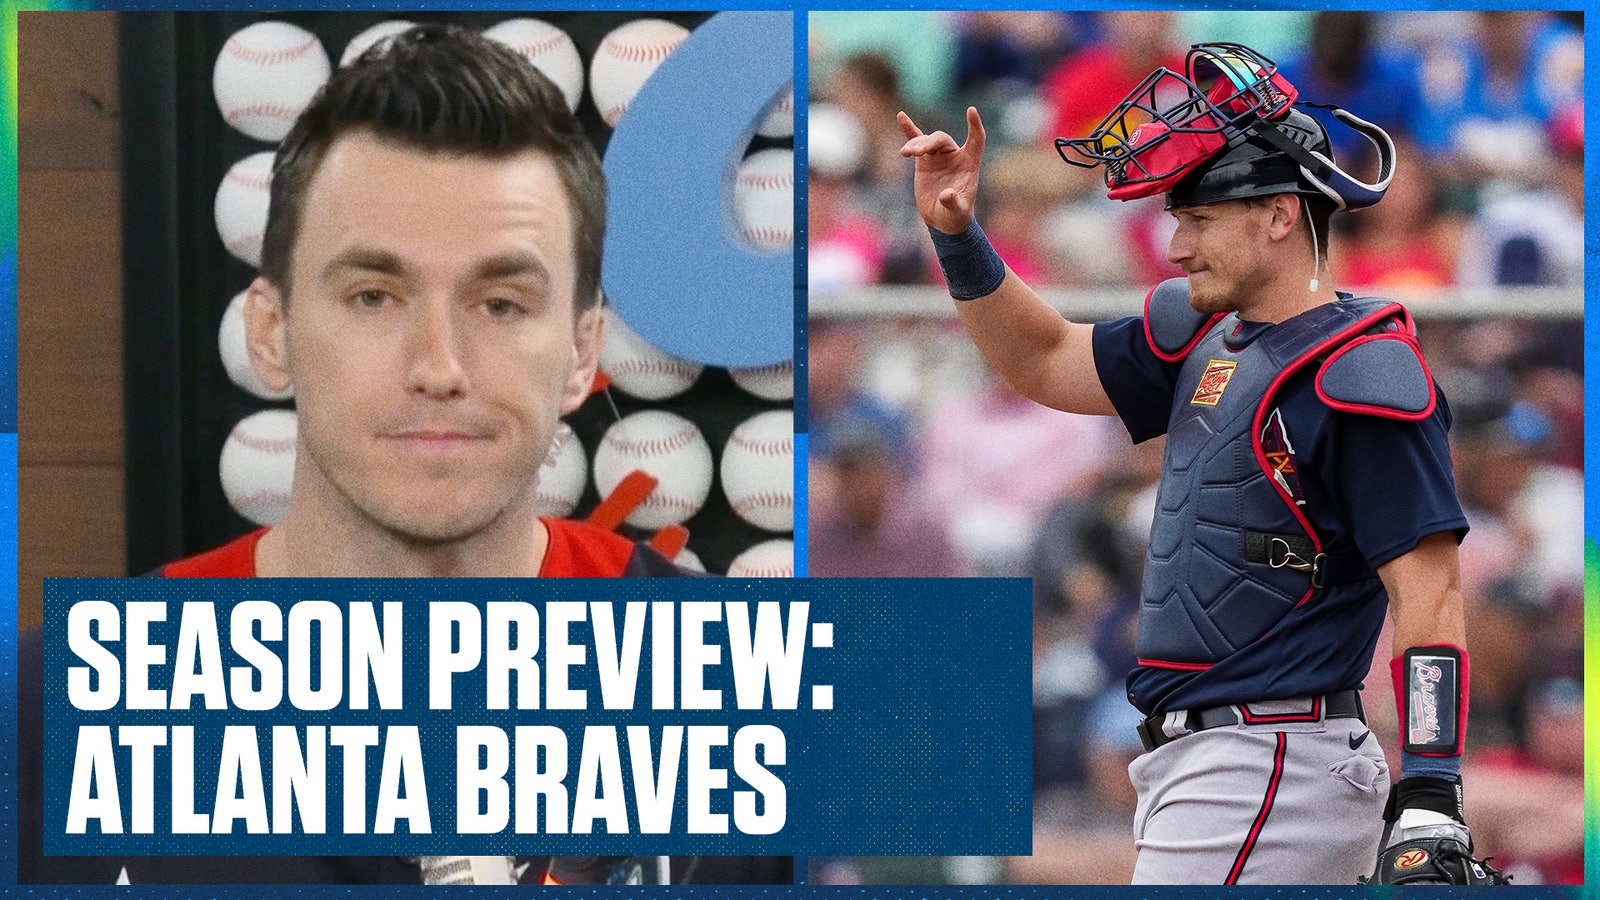 Atlanta Braves Season Preview: Will their new additions help win the NL East title